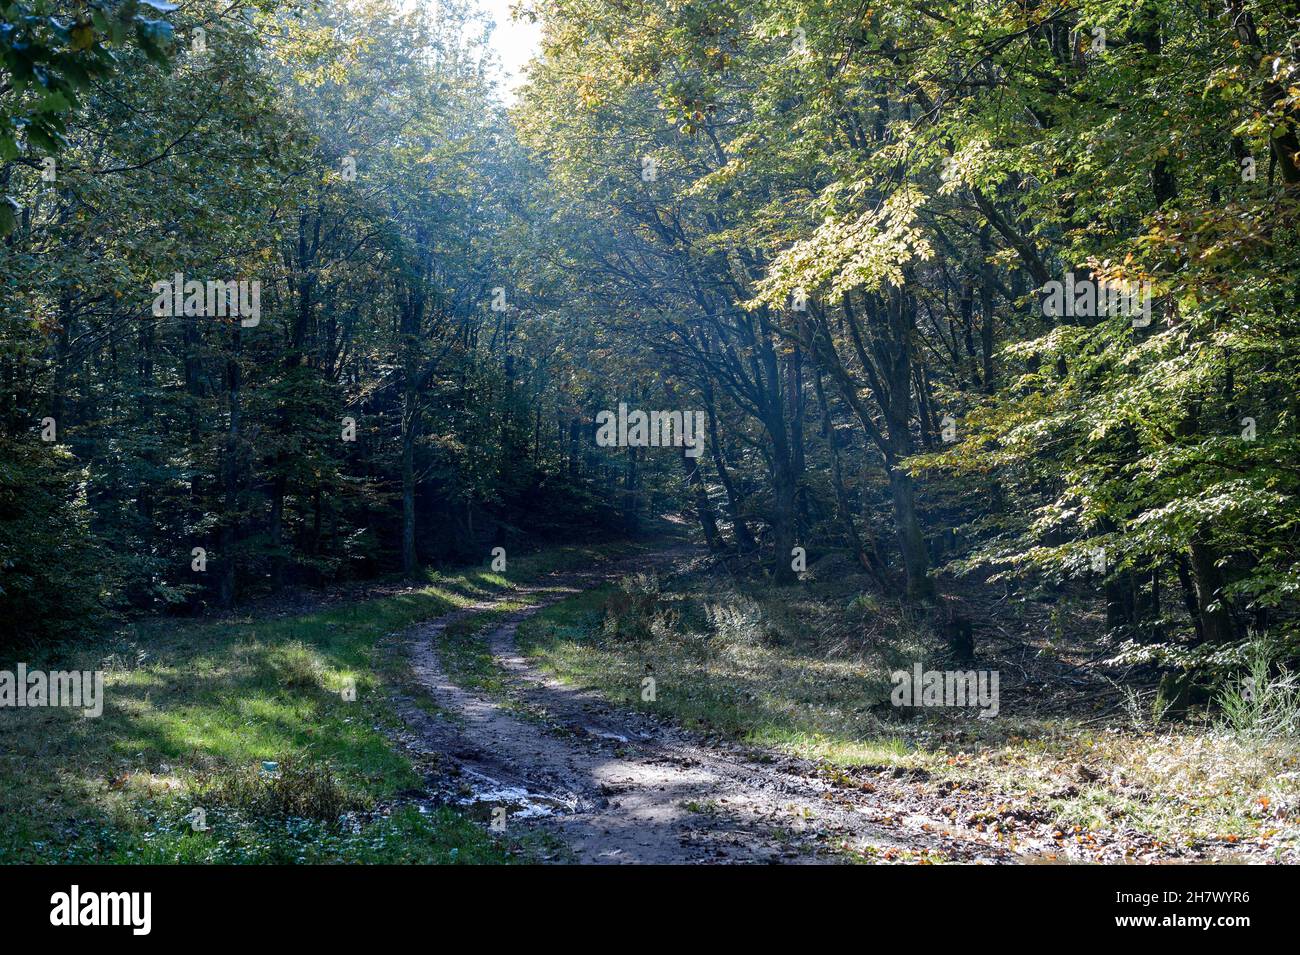 Ray of light through the mist. Alsace France. Small path in the Vosges forest. The light crossing the mist creates a blue reflection on the ground. Stock Photo